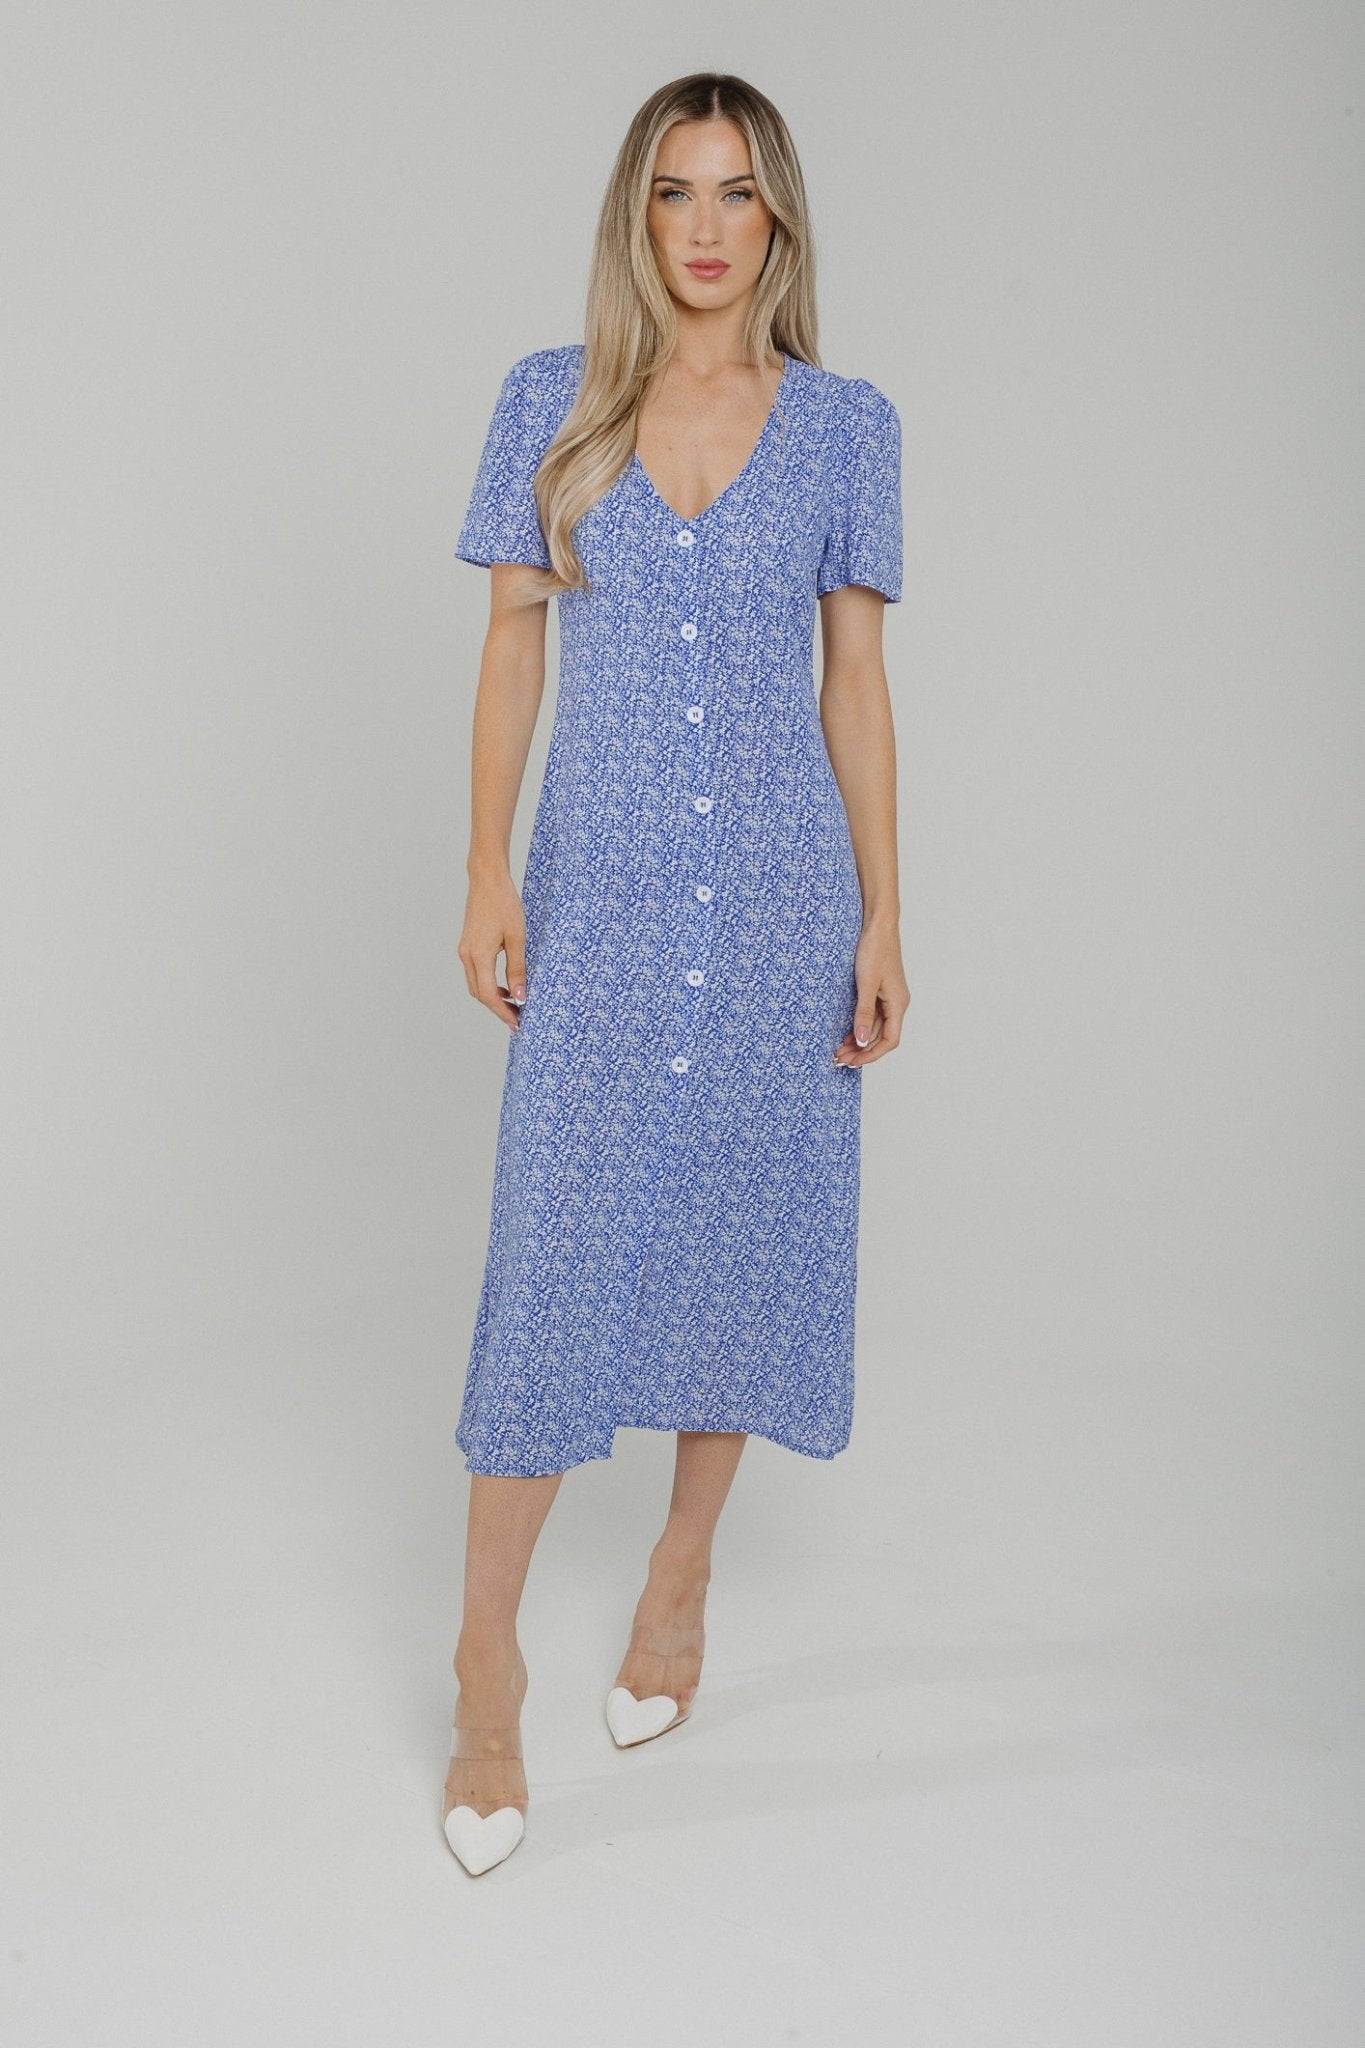 Lucy Button Front Dress In Blue Print - The Walk in Wardrobe